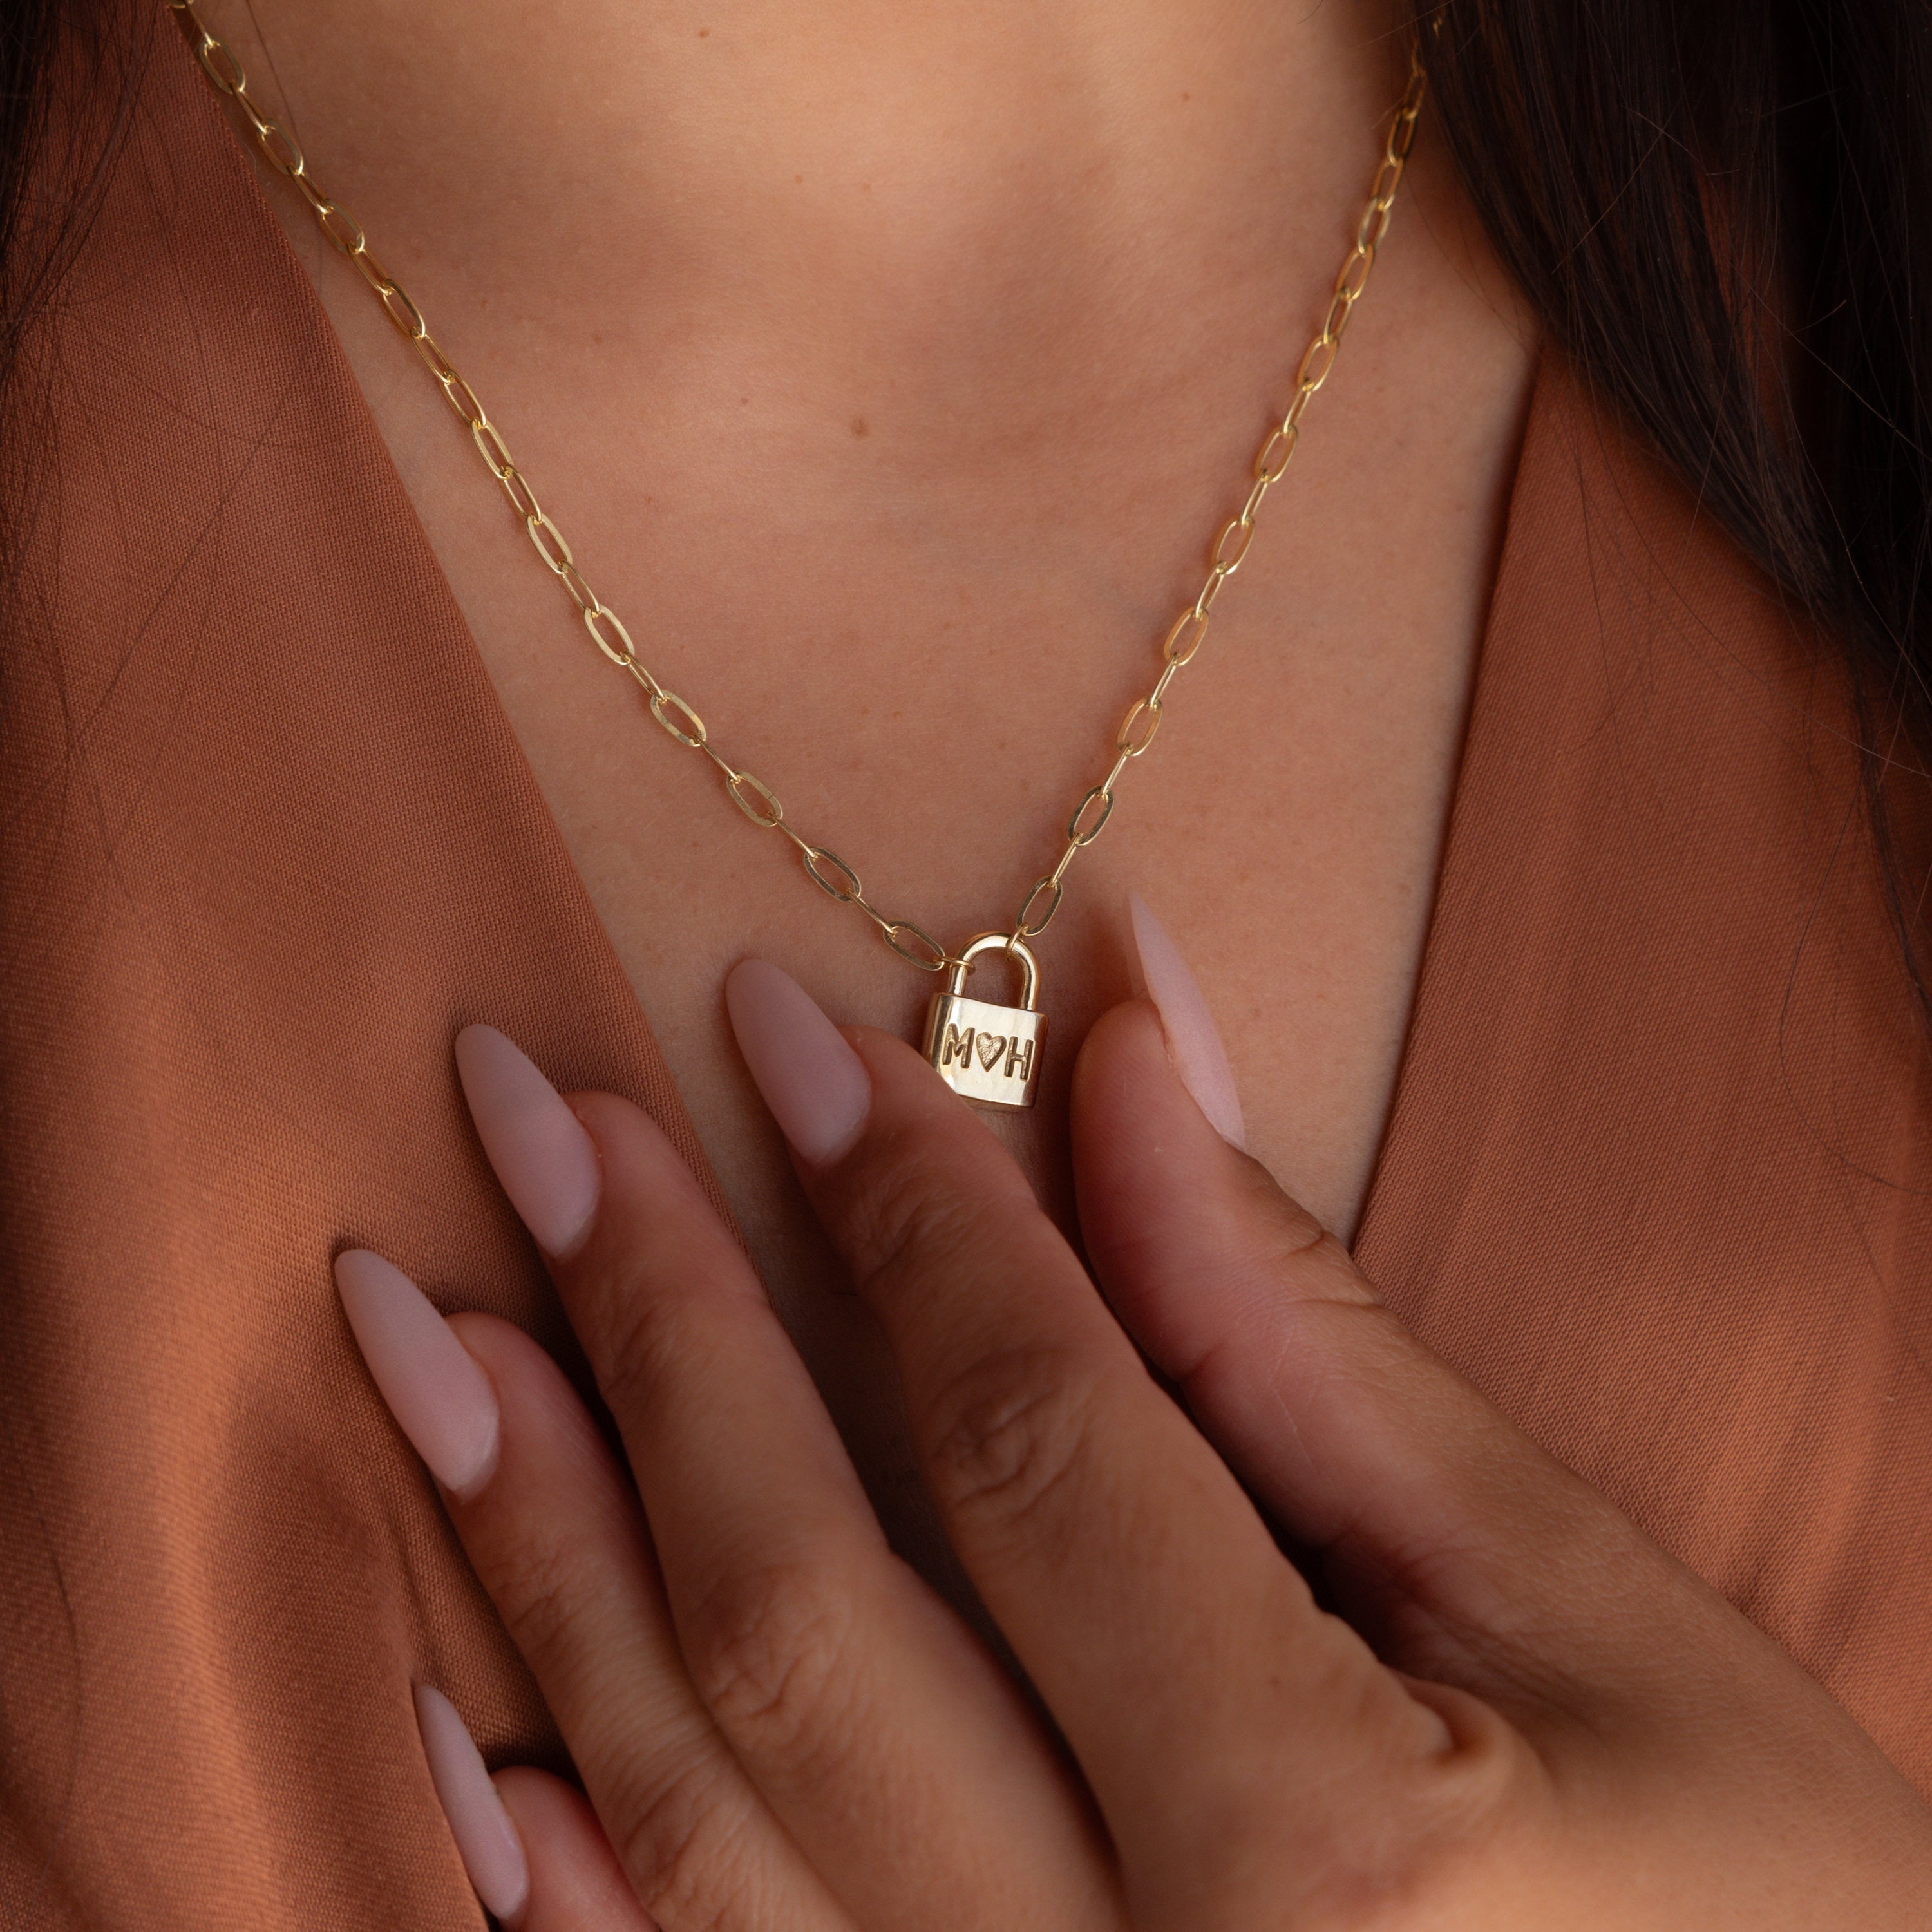 Padlock Necklace - Initial Necklace (18k gold) by Talisa